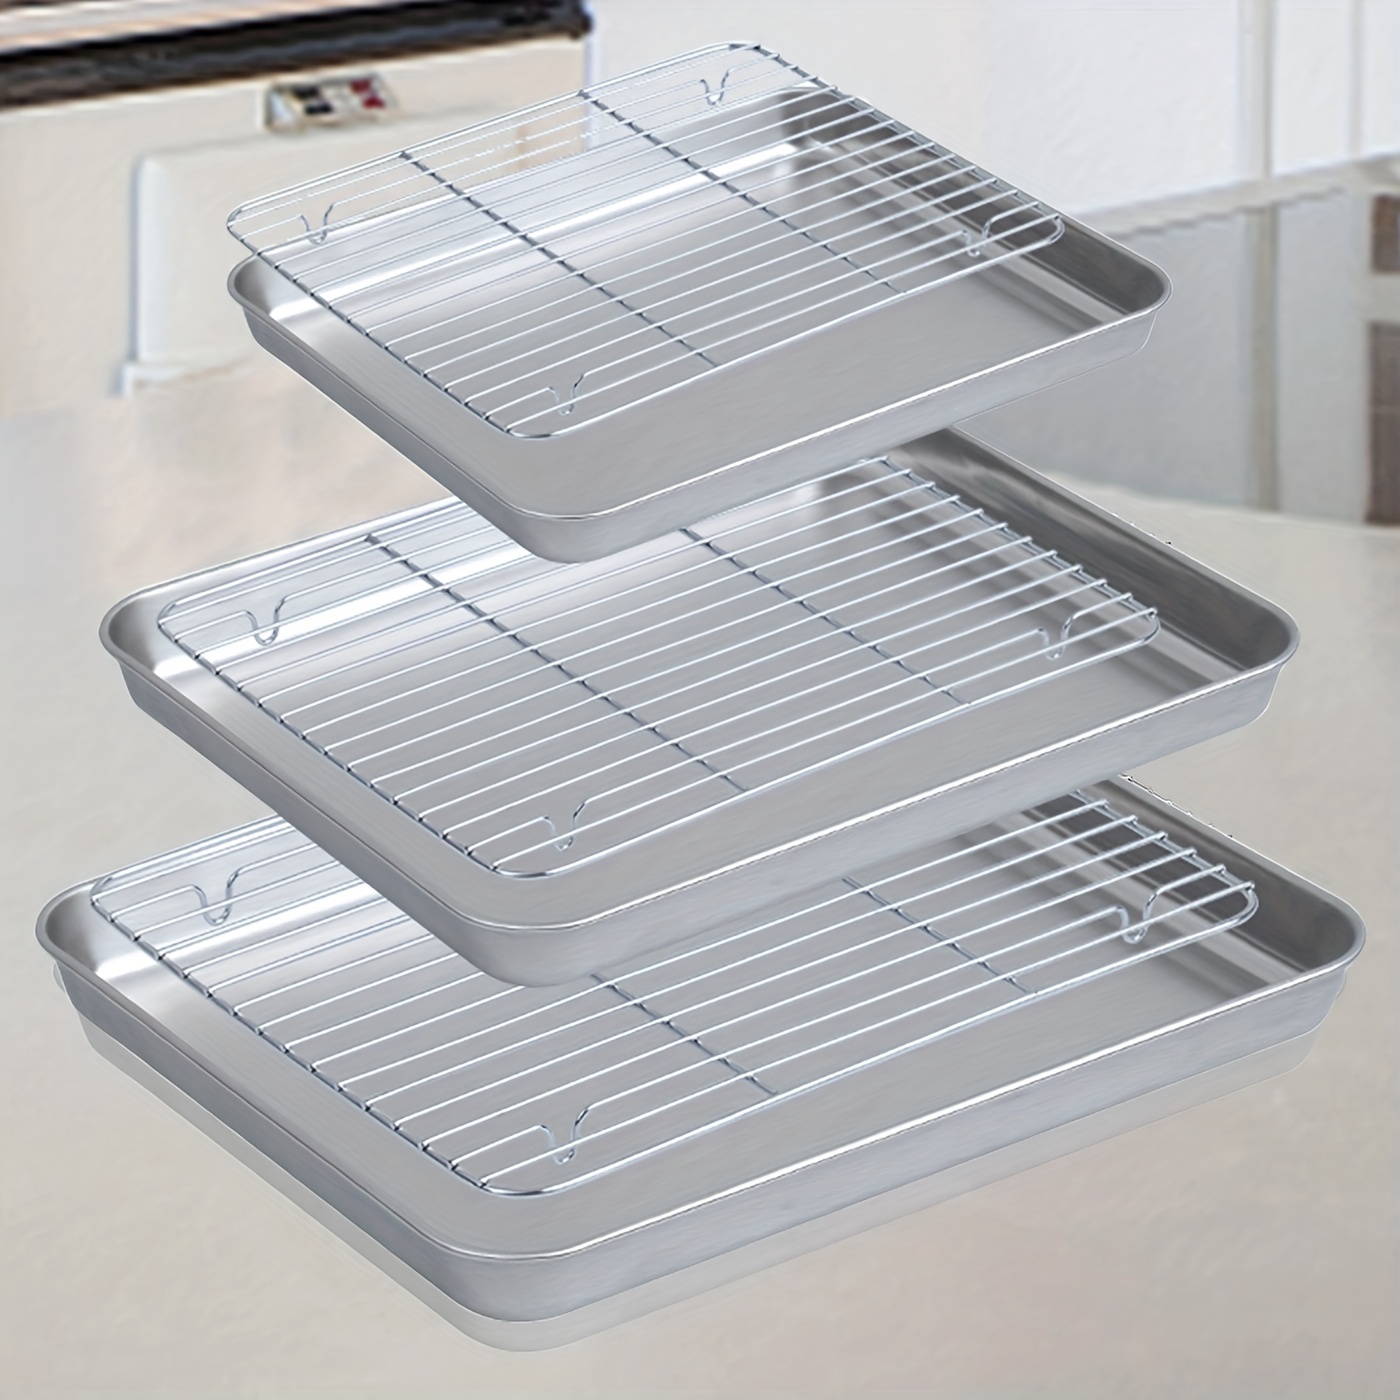 Stainless Steel Baking Sheet Tray Cooling Rack with Silicone Baking Mat  Set, Cookie Pan , Set of 6 (2 Sheets + 2 Racks + 2 Mats), Non Toxic, Heavy